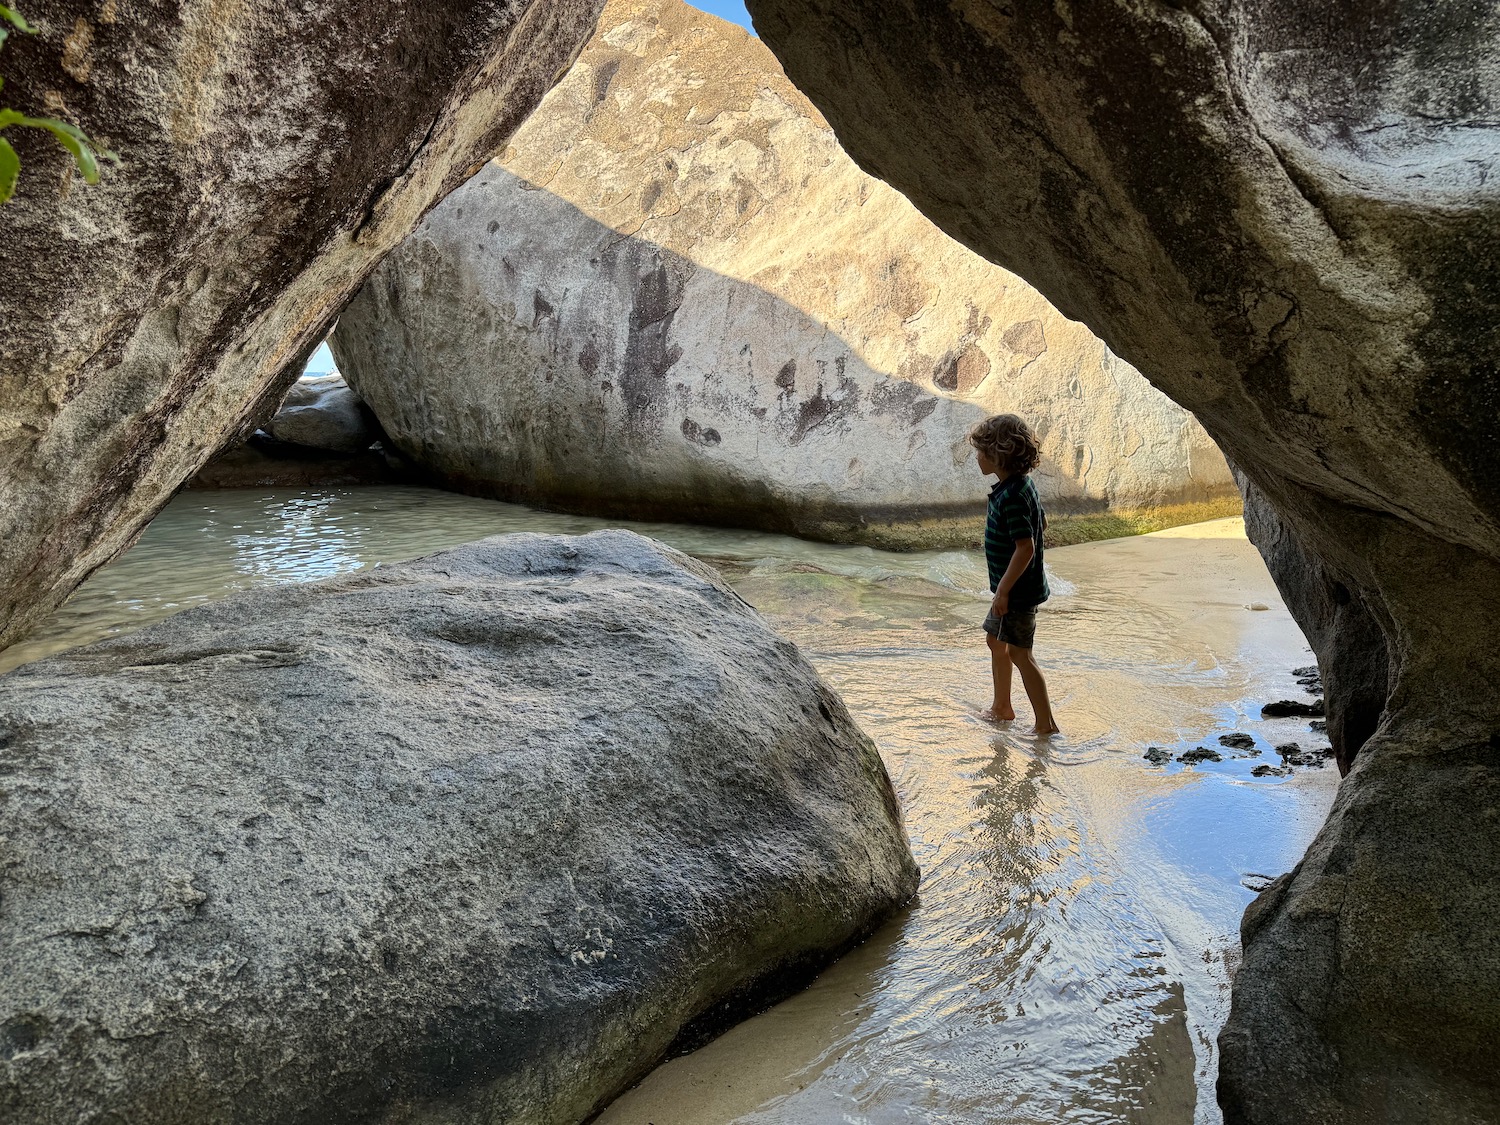 a child standing in water near large rocks